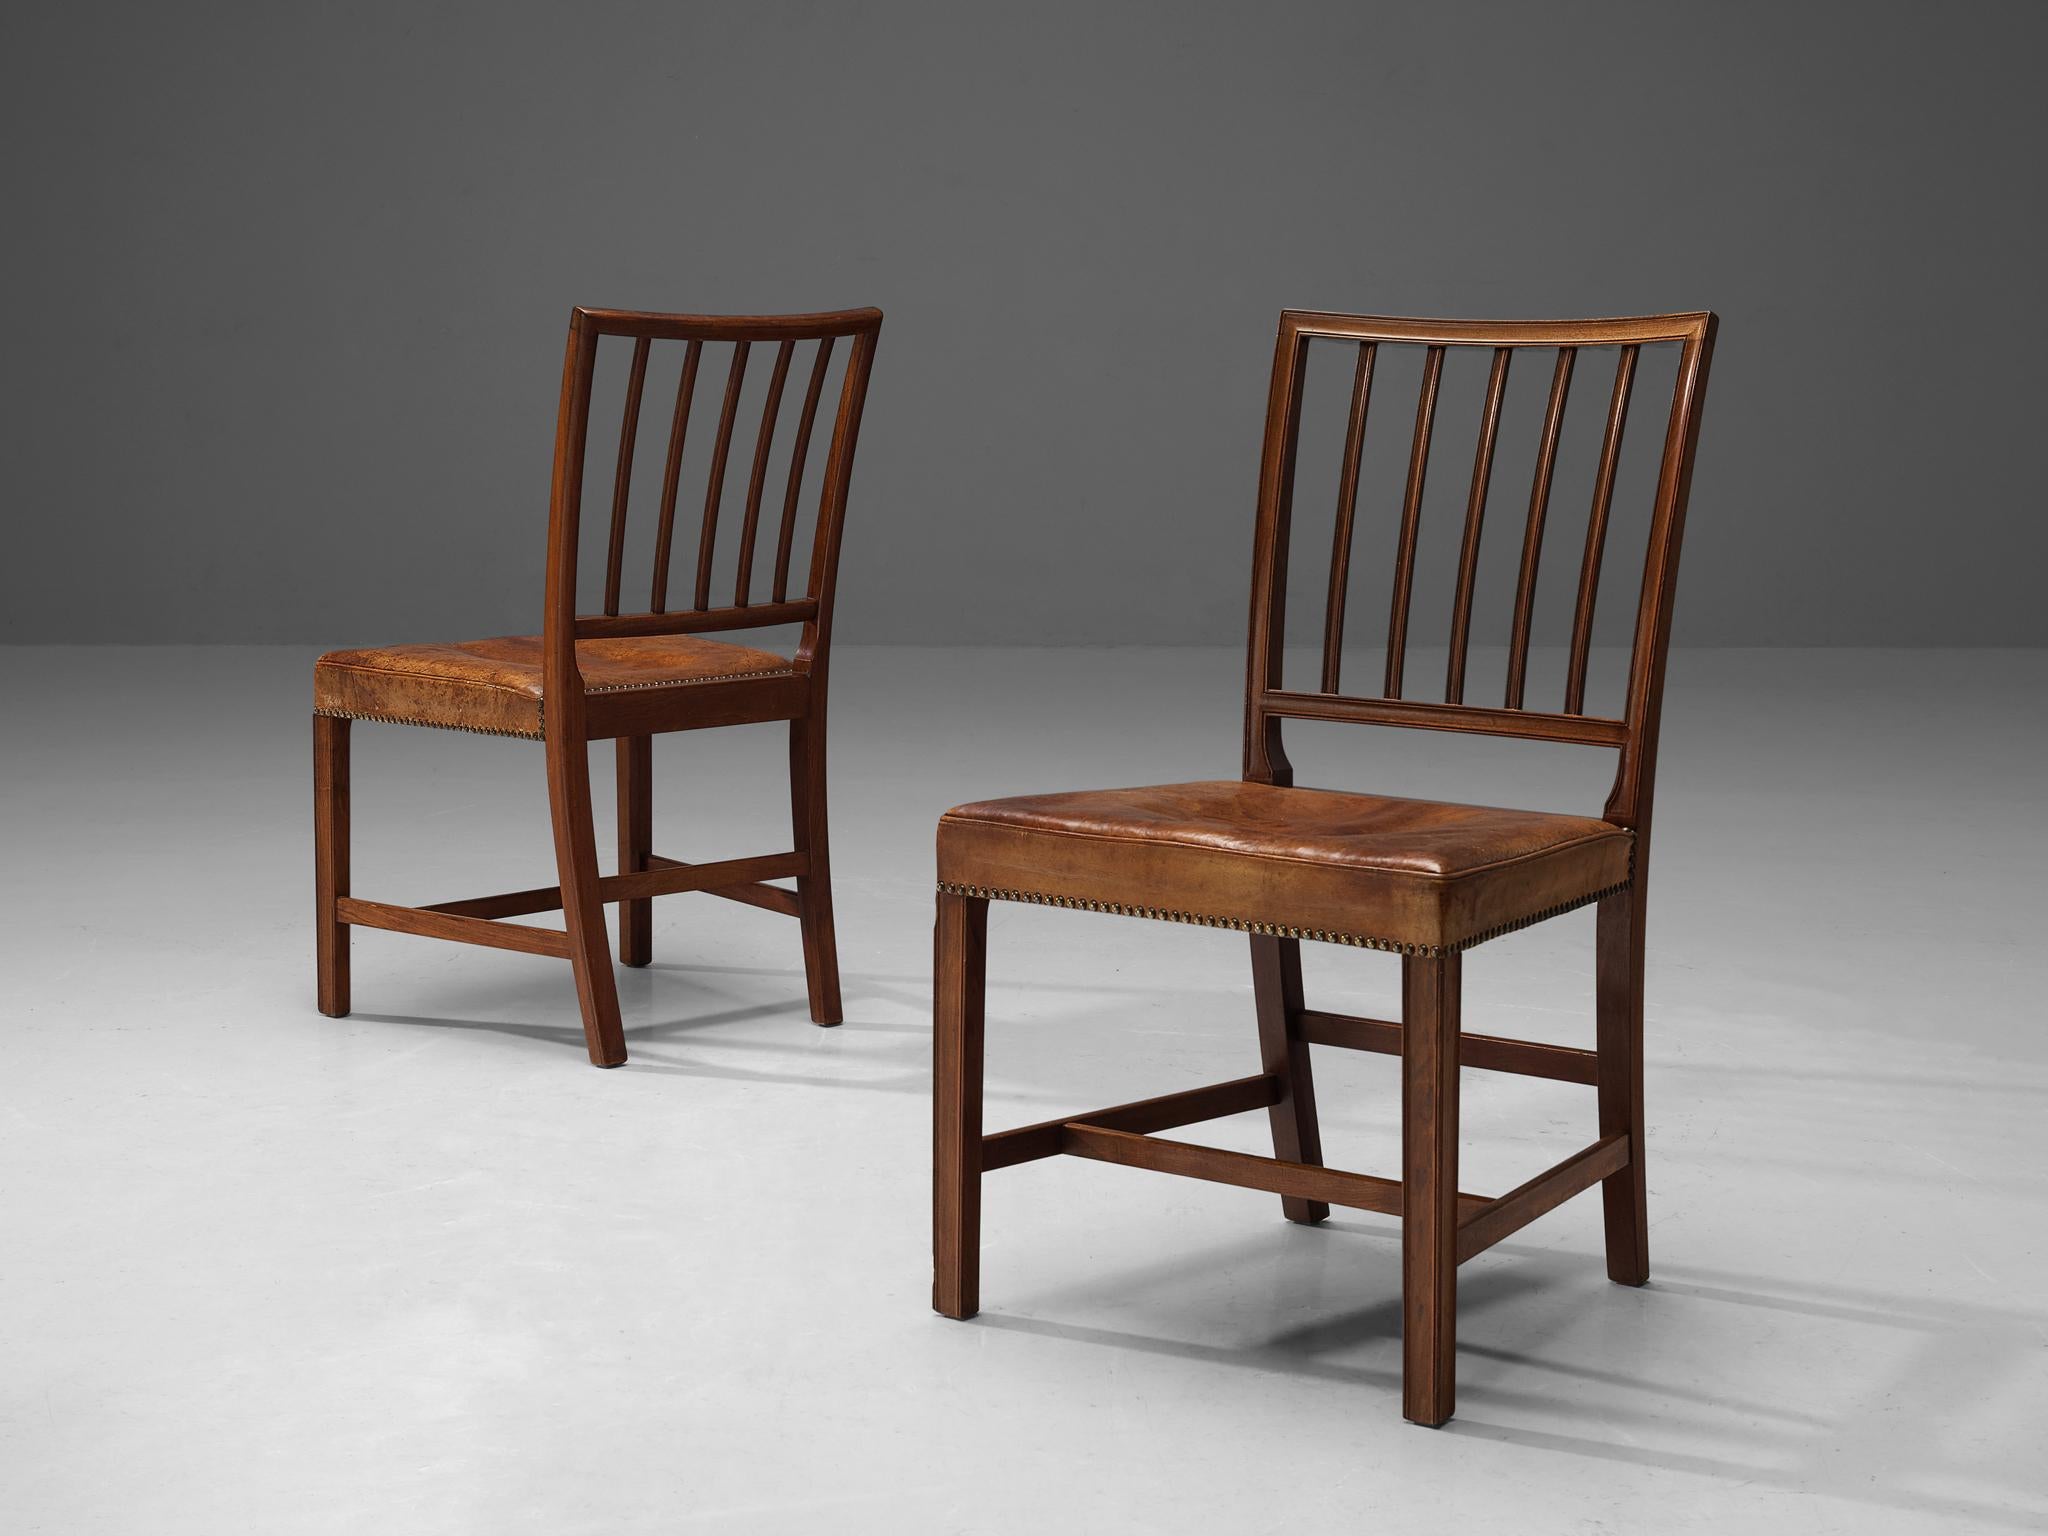 Scandinavian Modern Jacob Kjaer Rare Set of Six Dining Chairs in Mahogany and Niger Leather